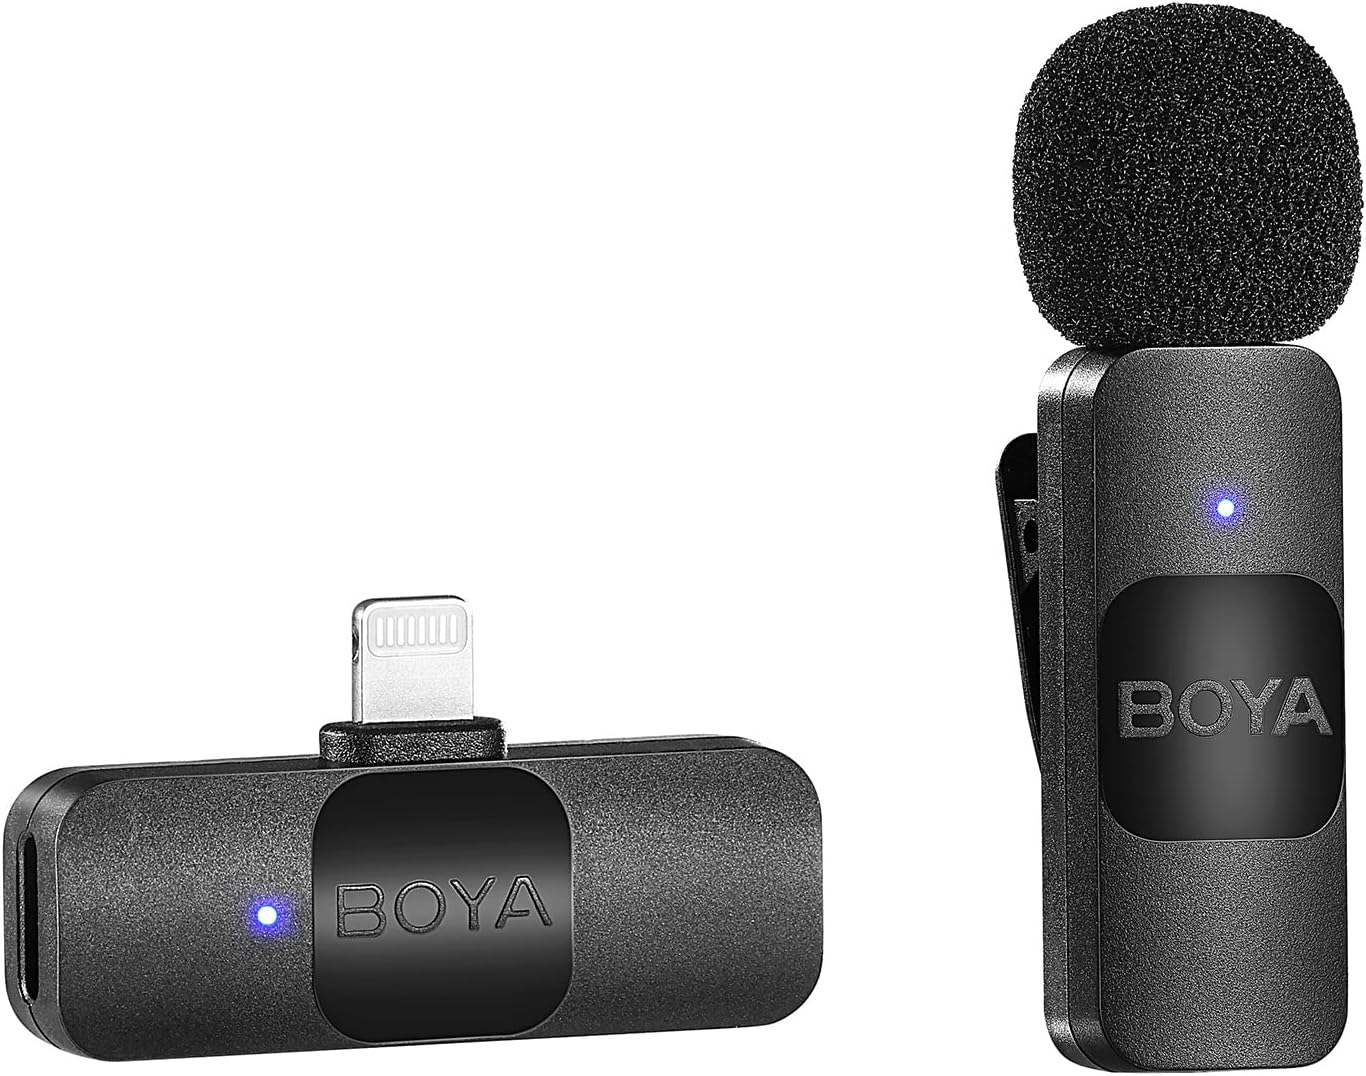 Boya BY-V1 Wireless Lavalier Microphone for iPhone,2.4GHz Plug Play Mnini Clip-On Mic with Noise Cancelling for Vlogging Video Podcast Interview YouTube Recording